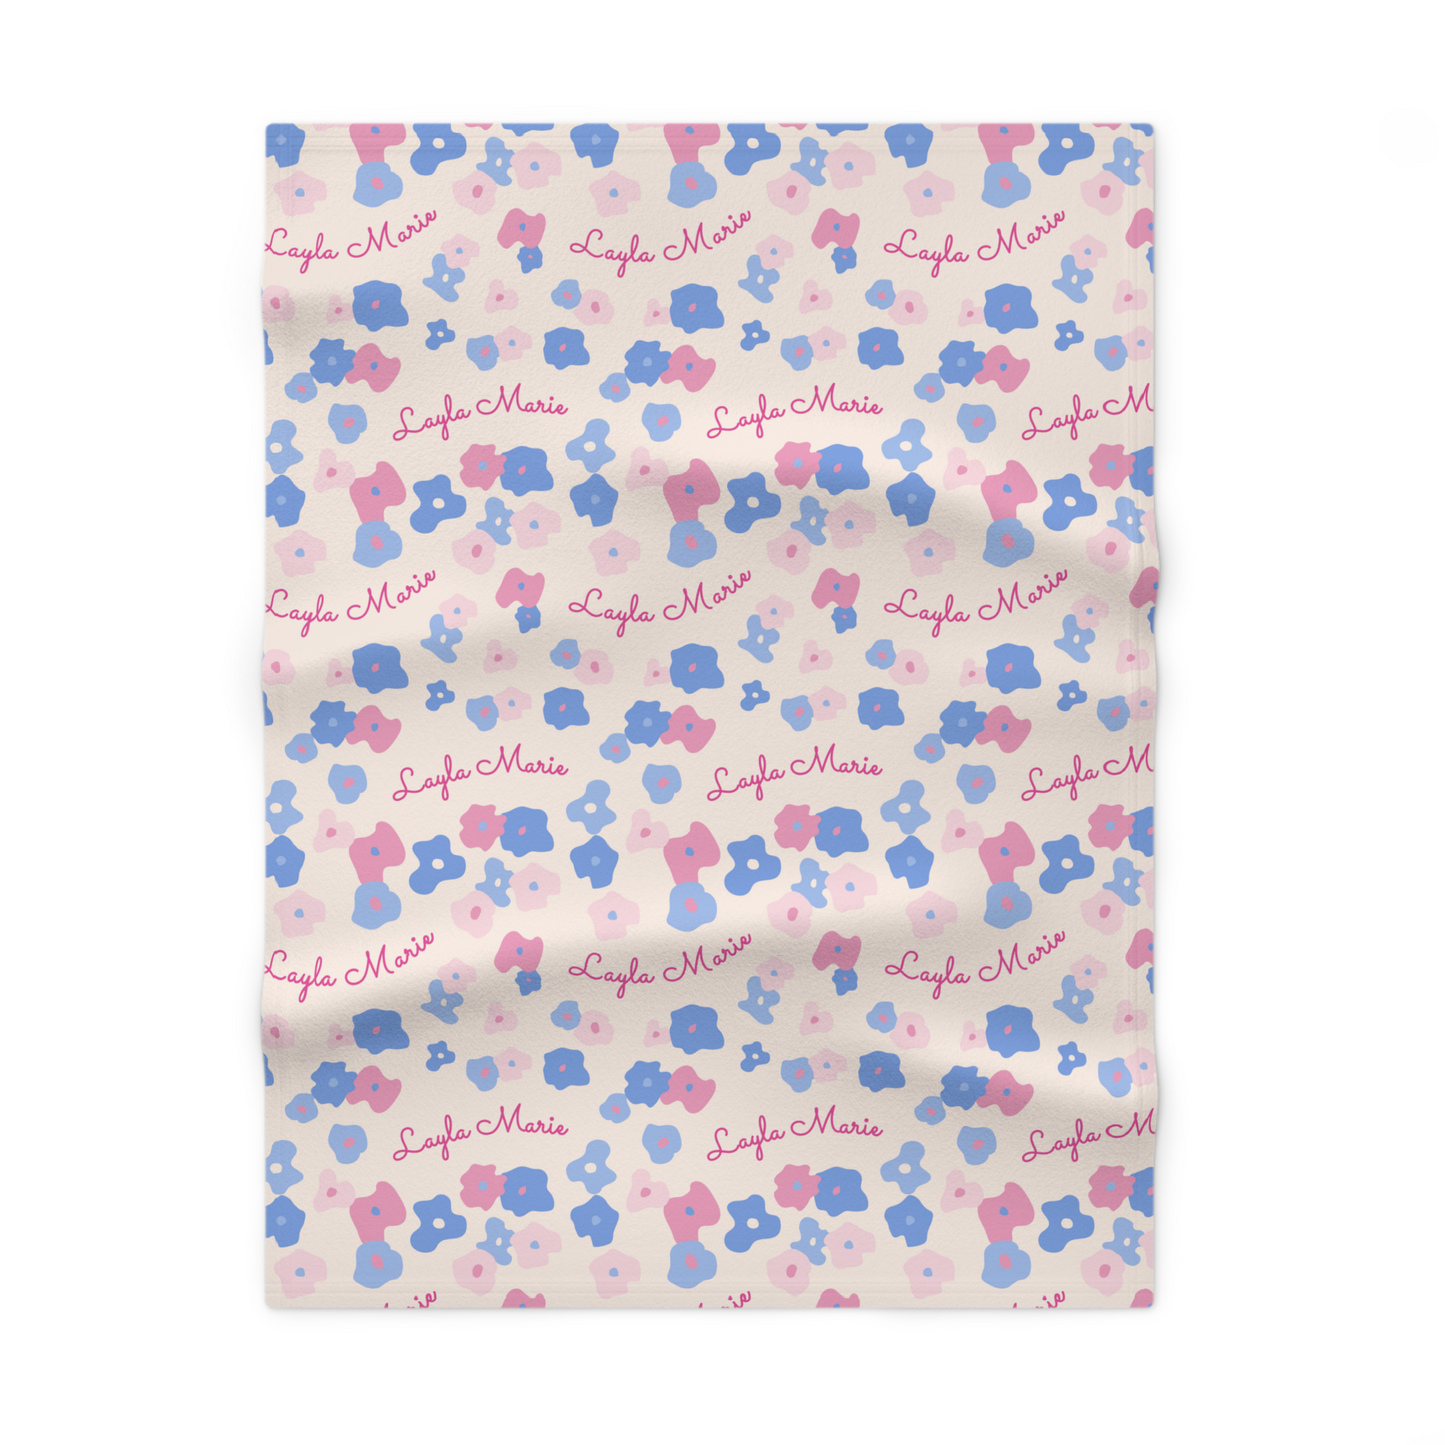 Fleece personalized baby blanket in graphic pink and blue daisy pattern laid flat